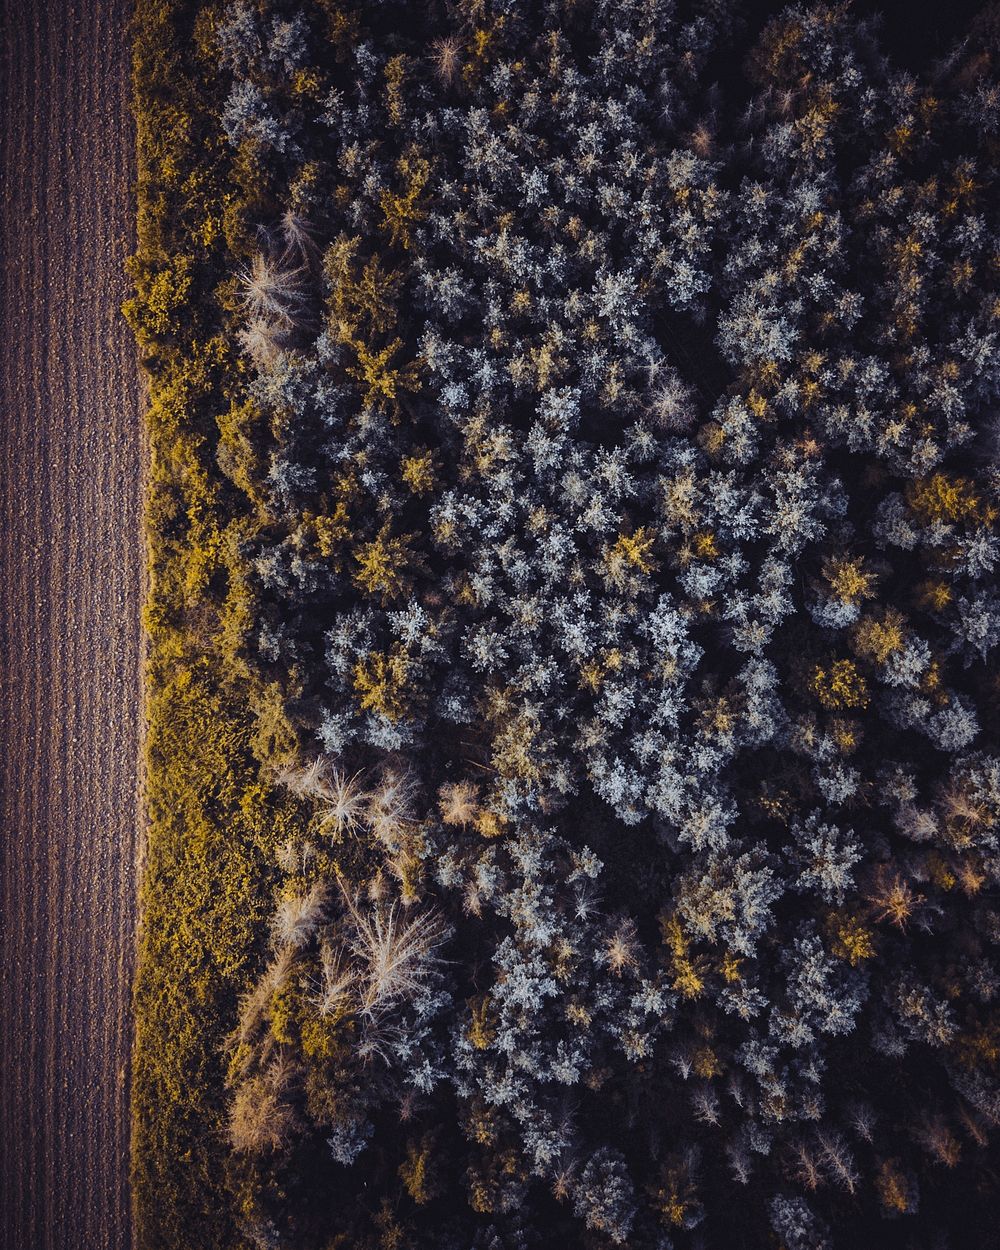 Aerial view of the forest in Vaihingen an der Enz, Germany